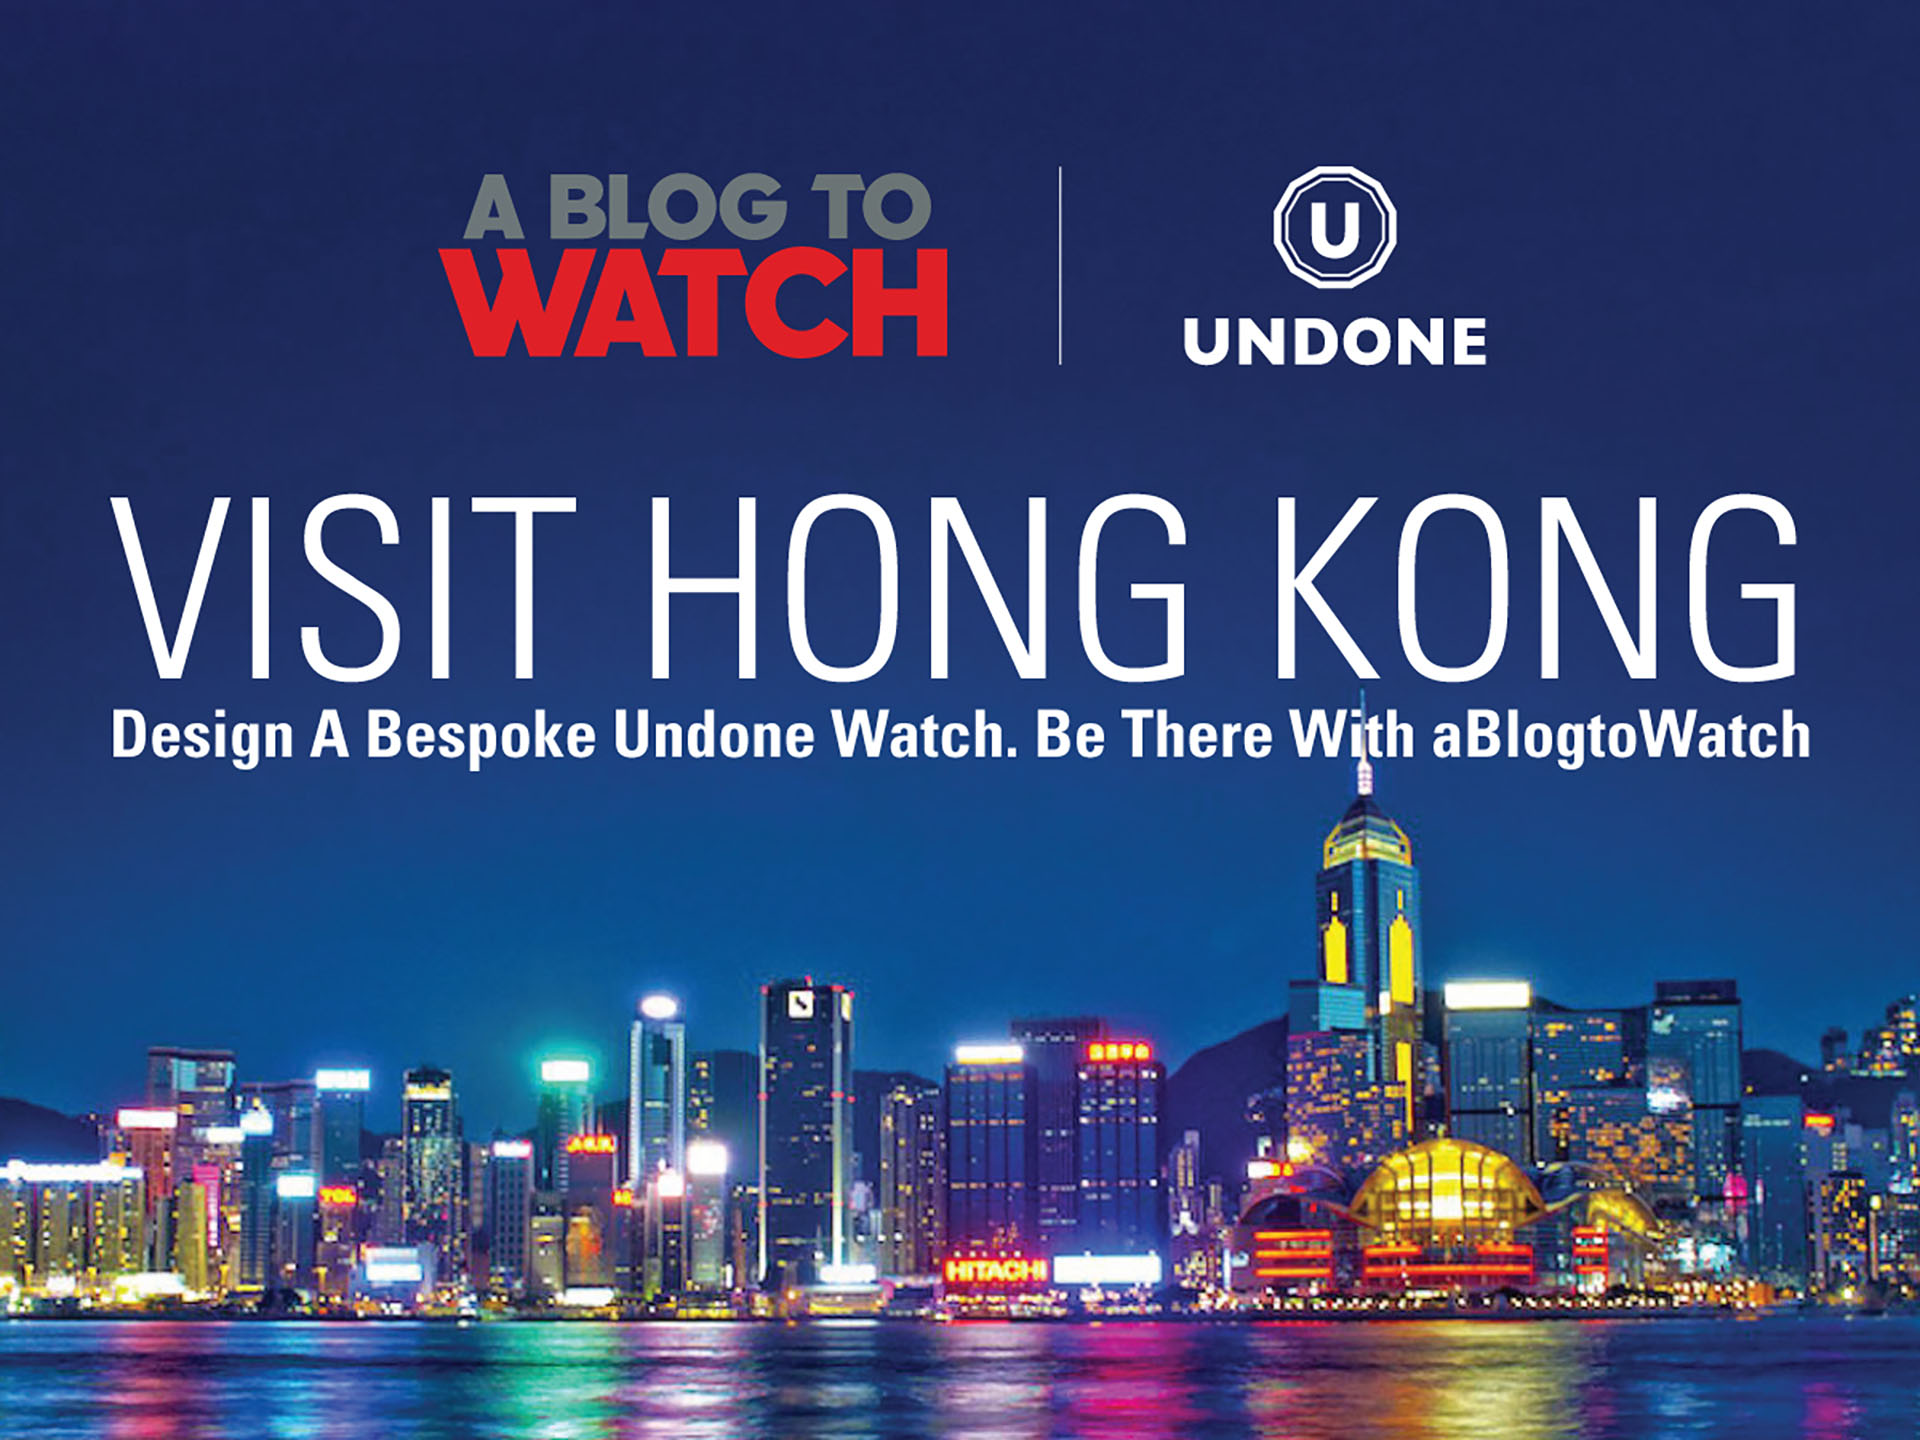 Winner Announced: Visit Hong Kong To Make A One-Of-A-Kind Undone Watch